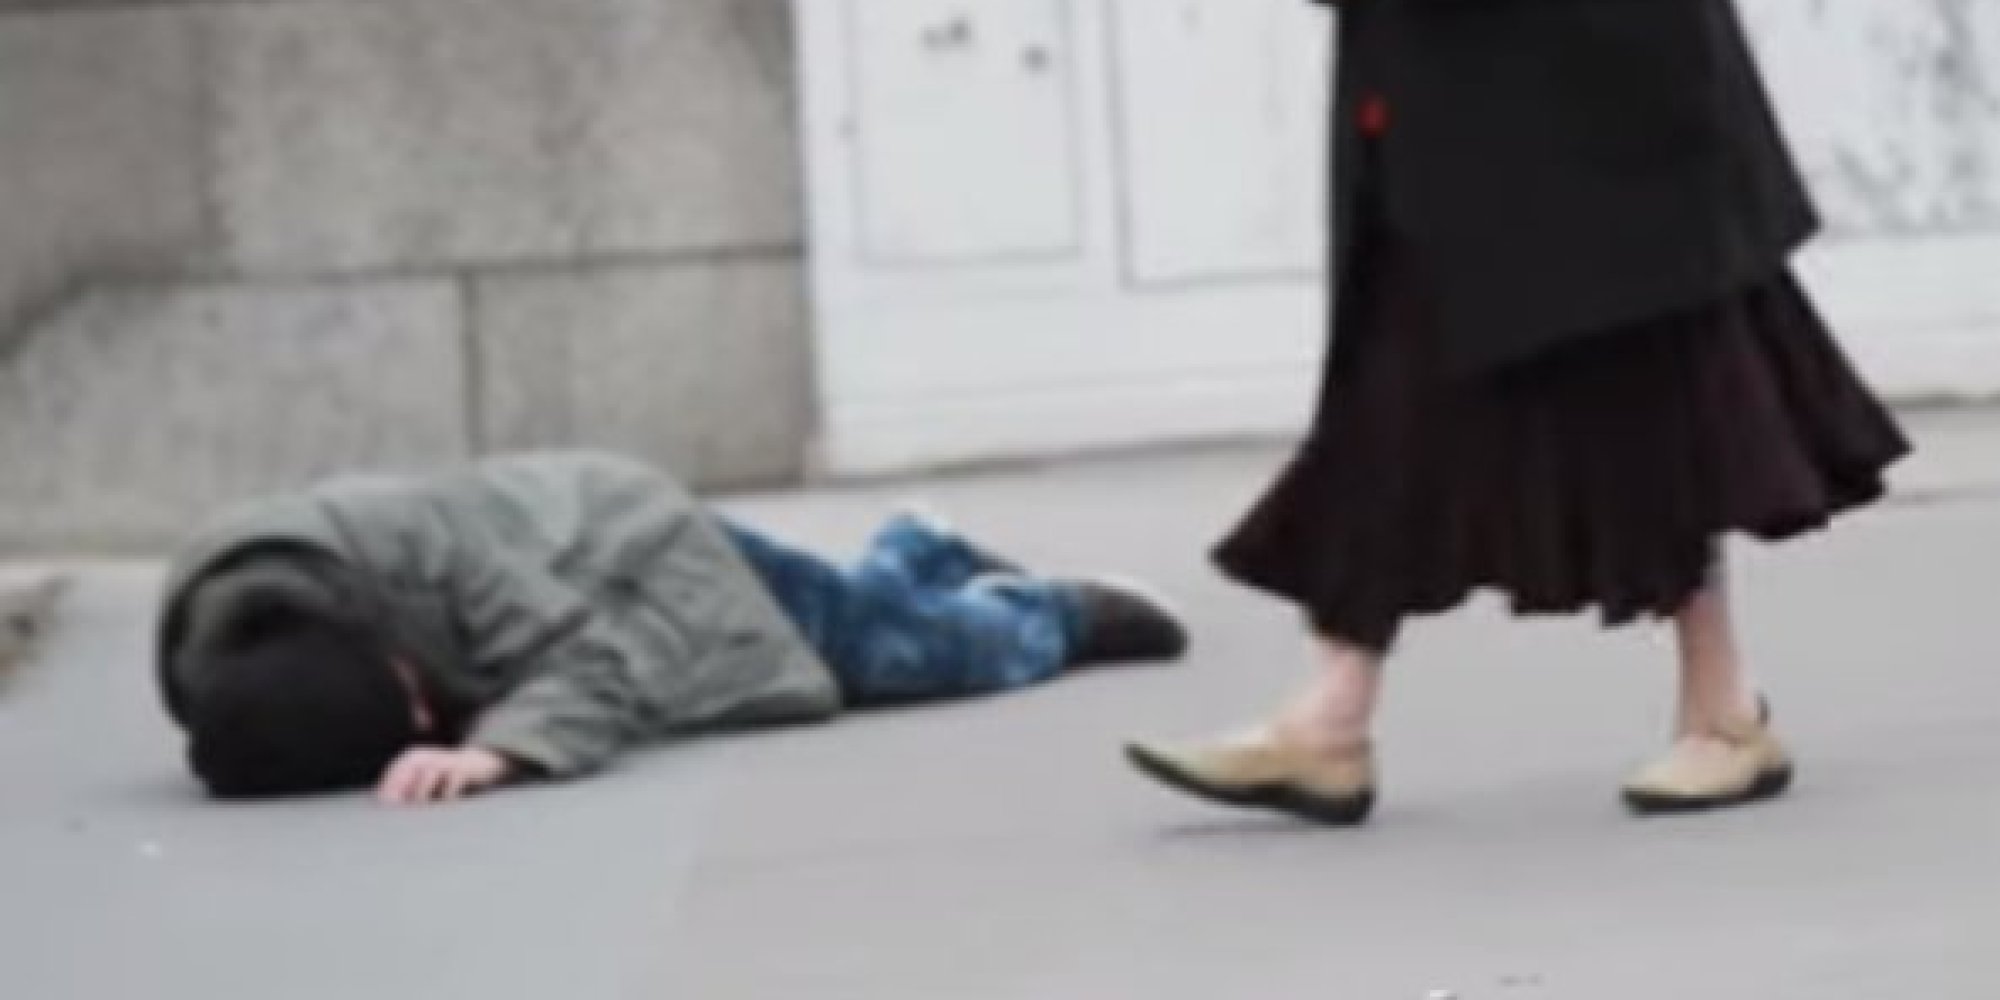 Social Experiment Reveals Our Biases When 'Homeless' Man And